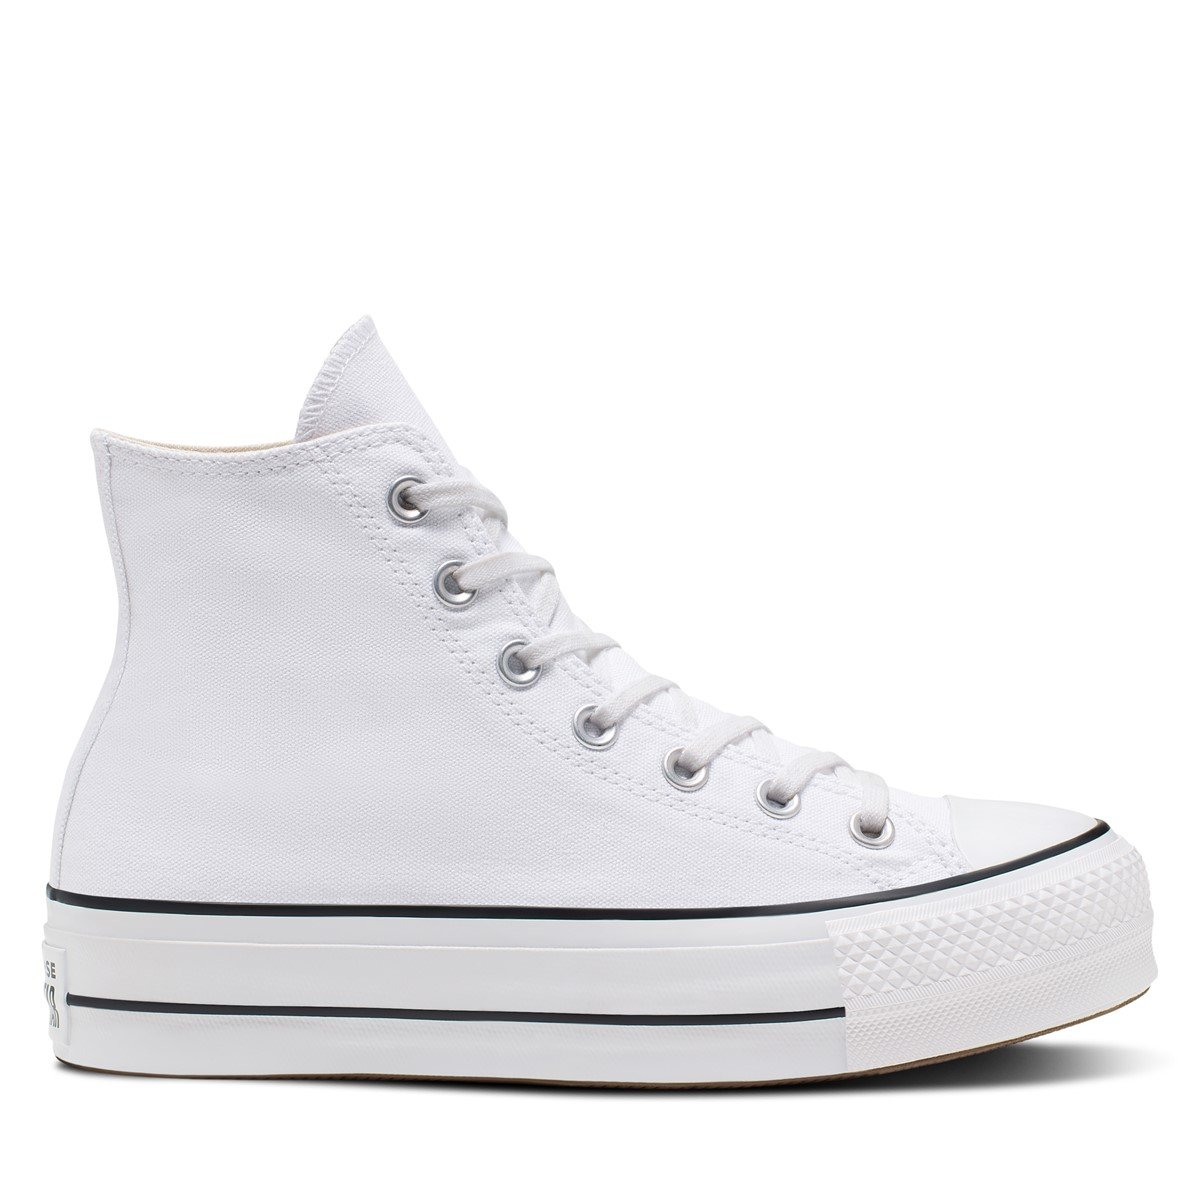 Women's Chuck Taylor All Star Lift Hi Sneakers in White